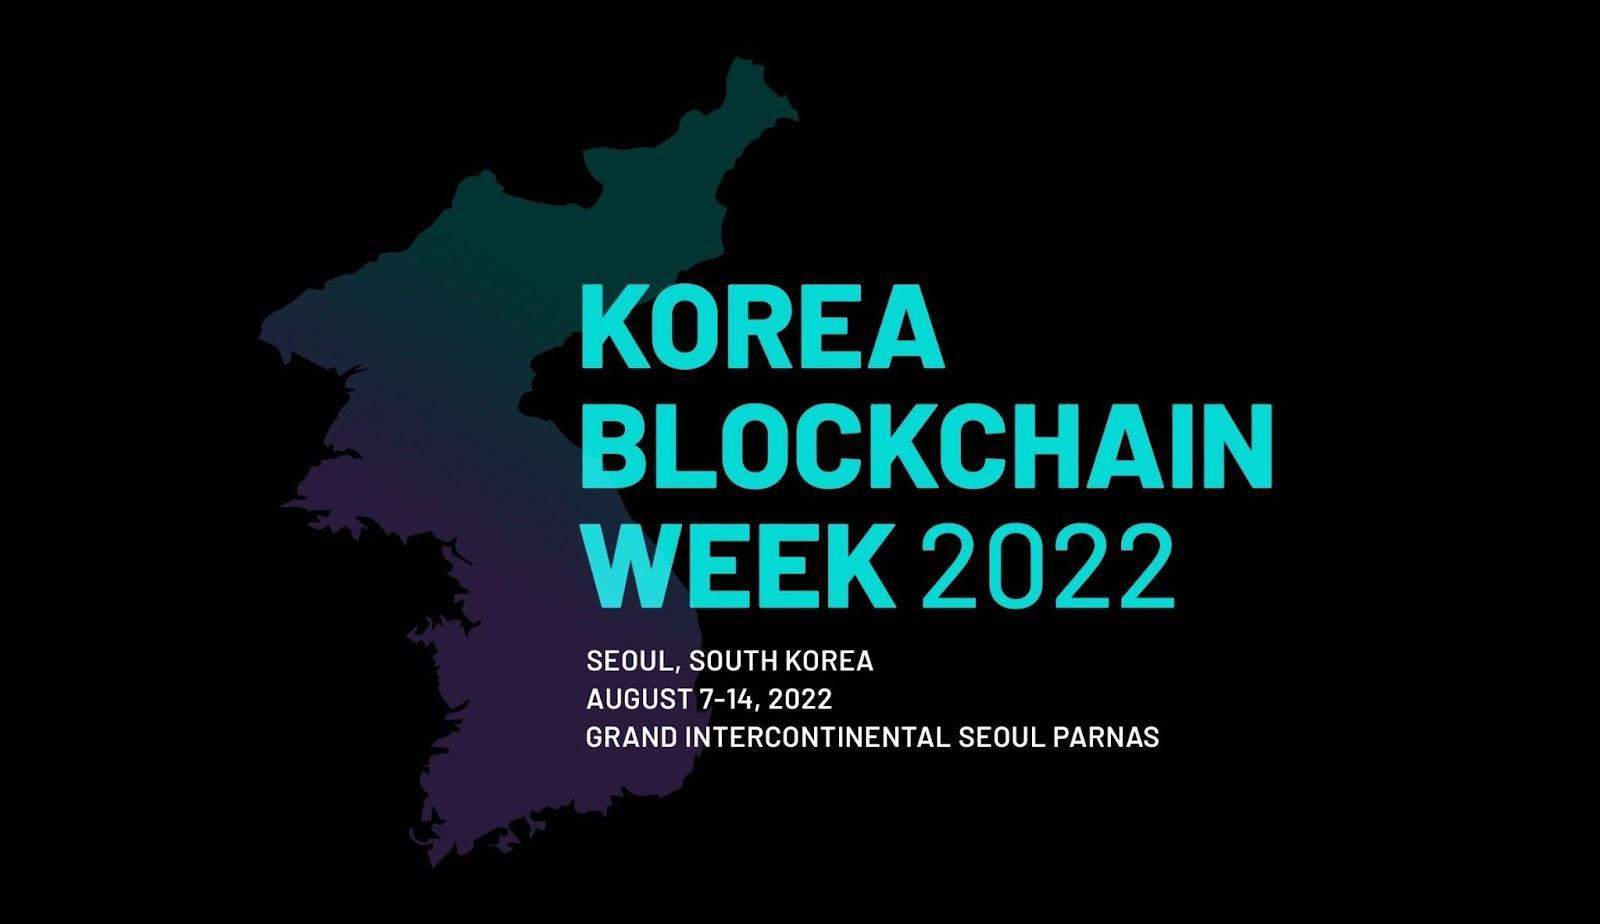 Korea-blockchain-week-to-hold-first-live-event-in-seoul-after-covid-hiatus